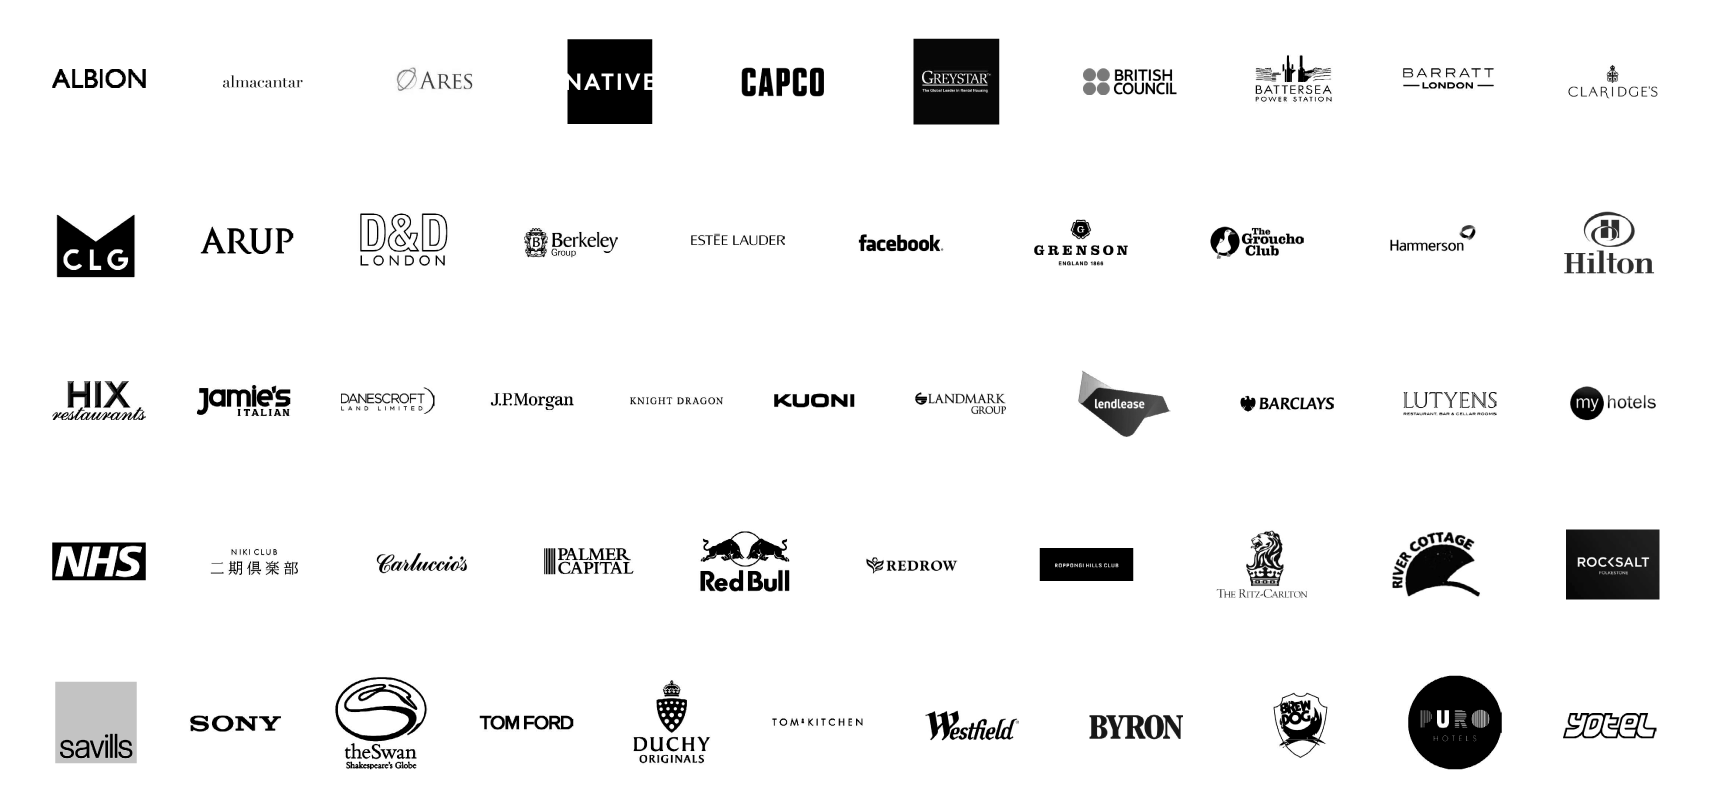 The image shows a collection of various company logos displayed in rows.